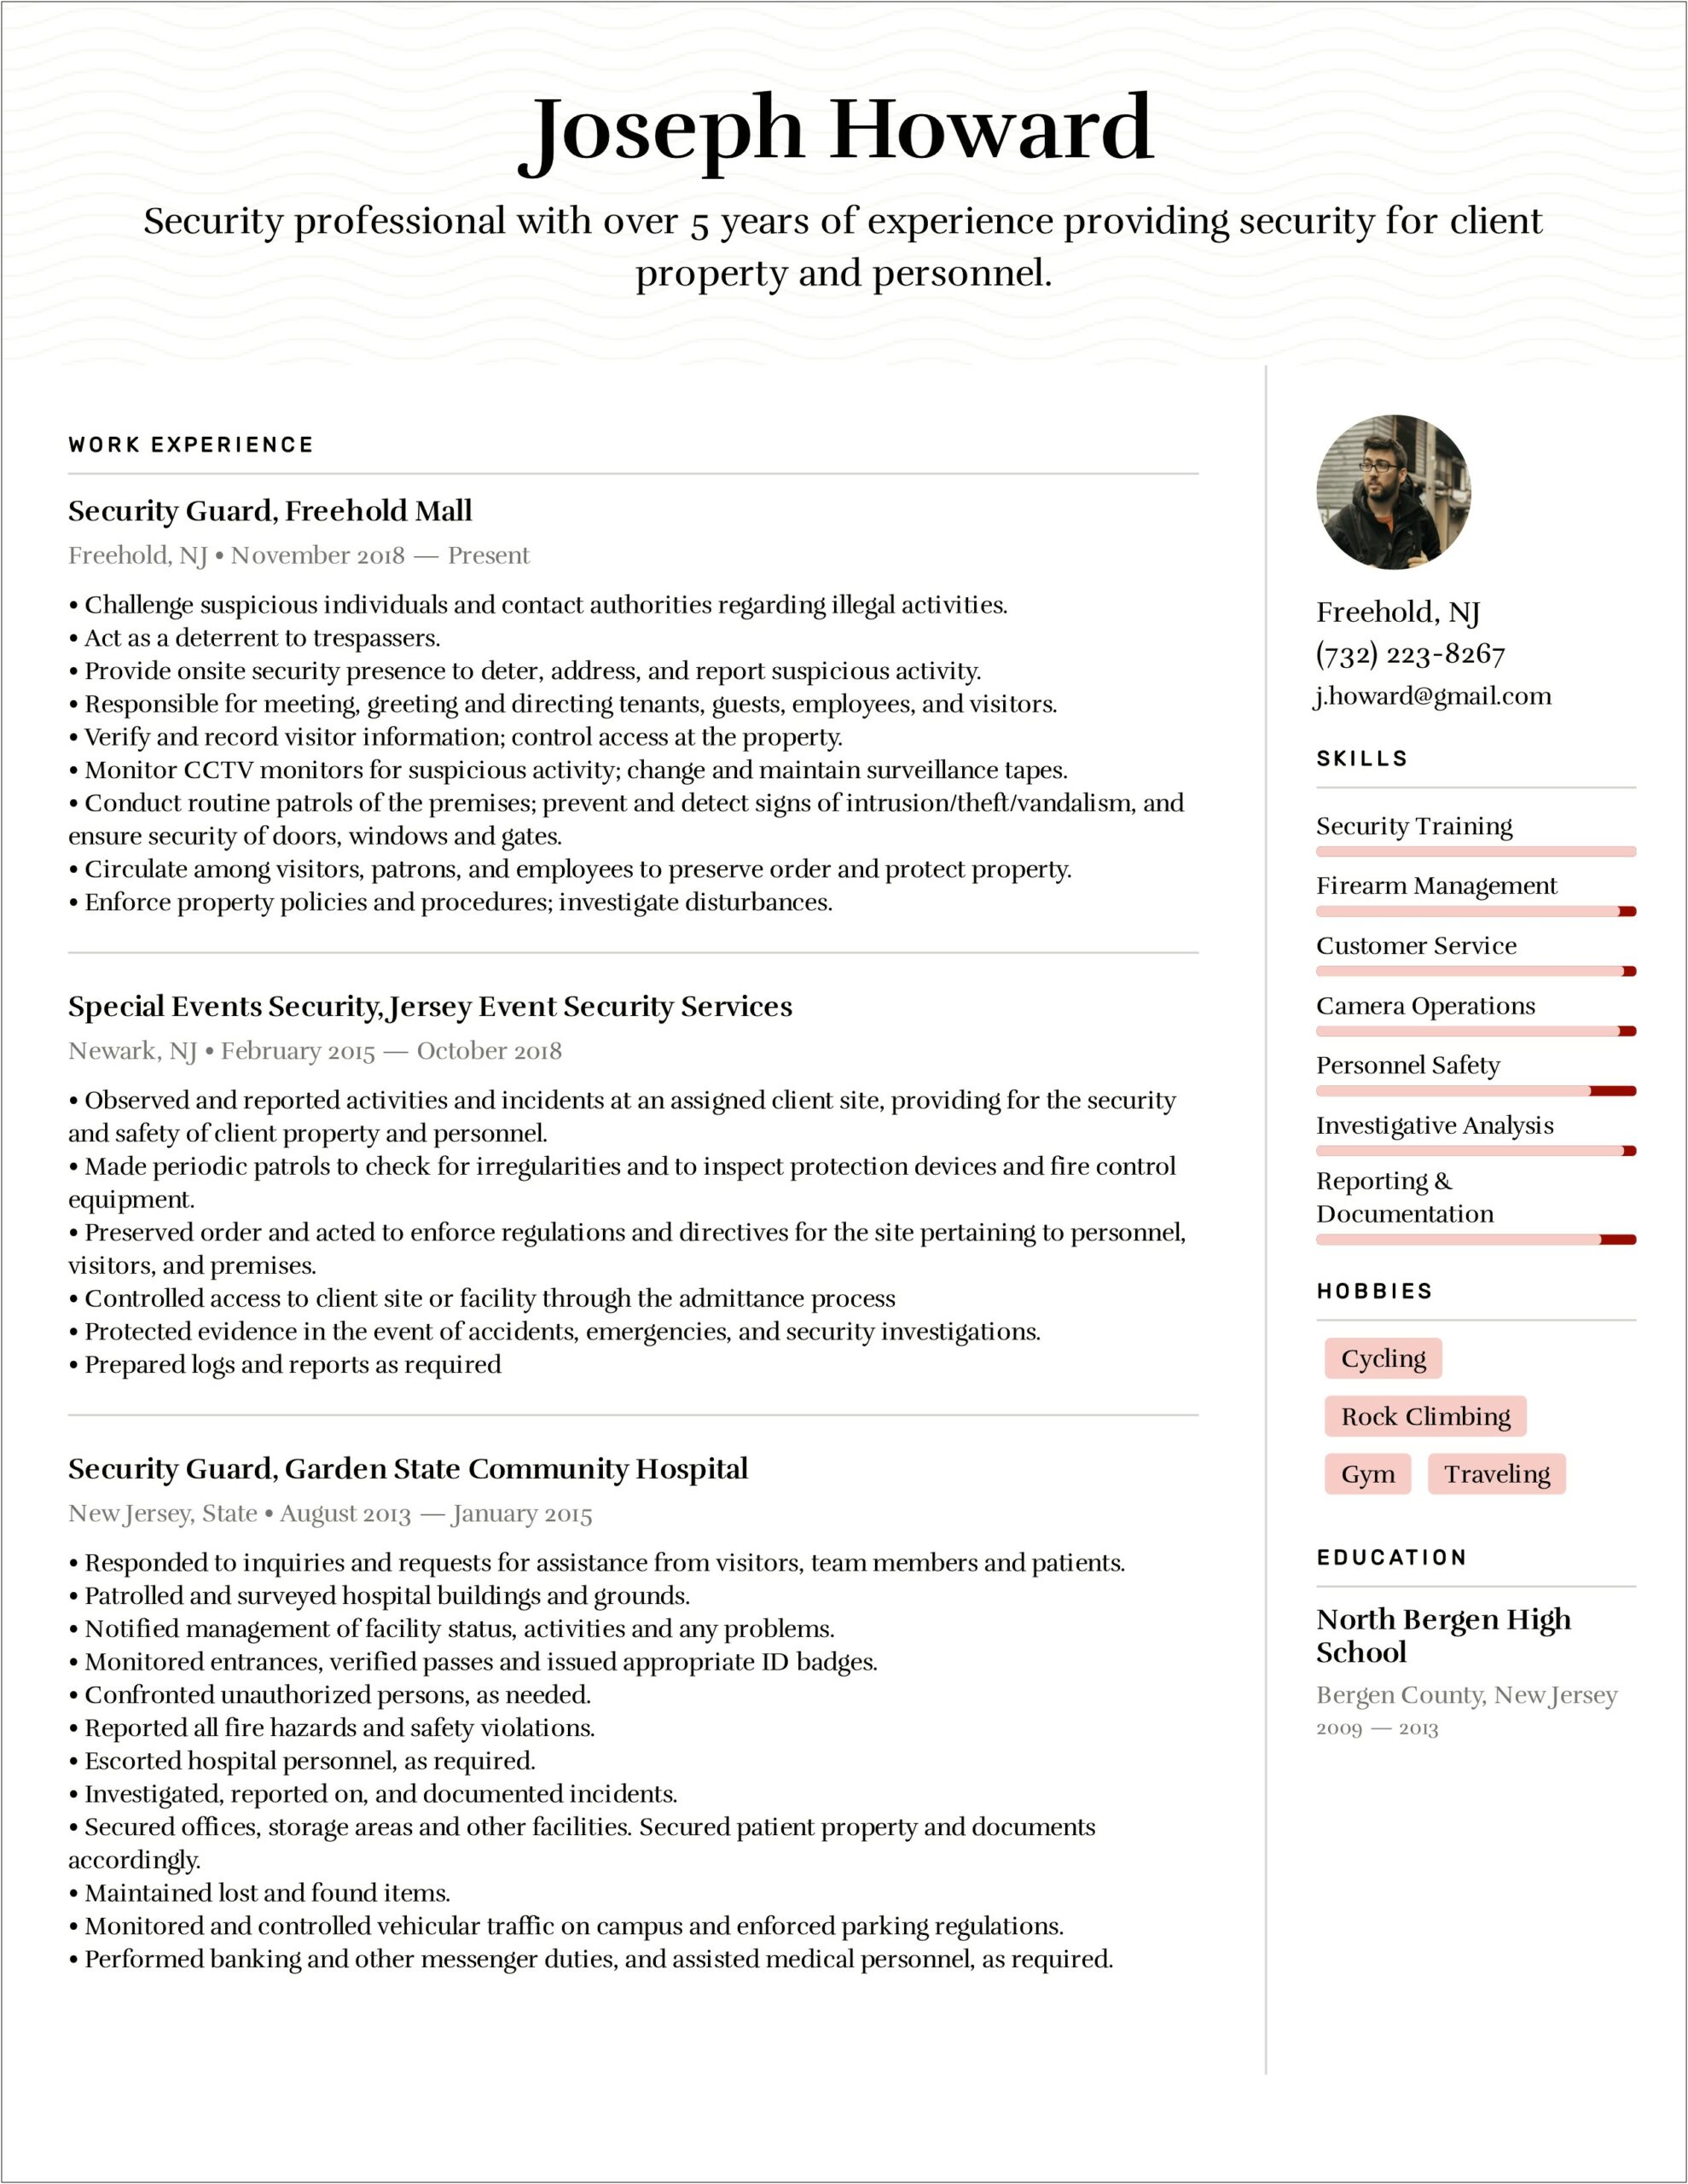 Sample Resume For Security Technician